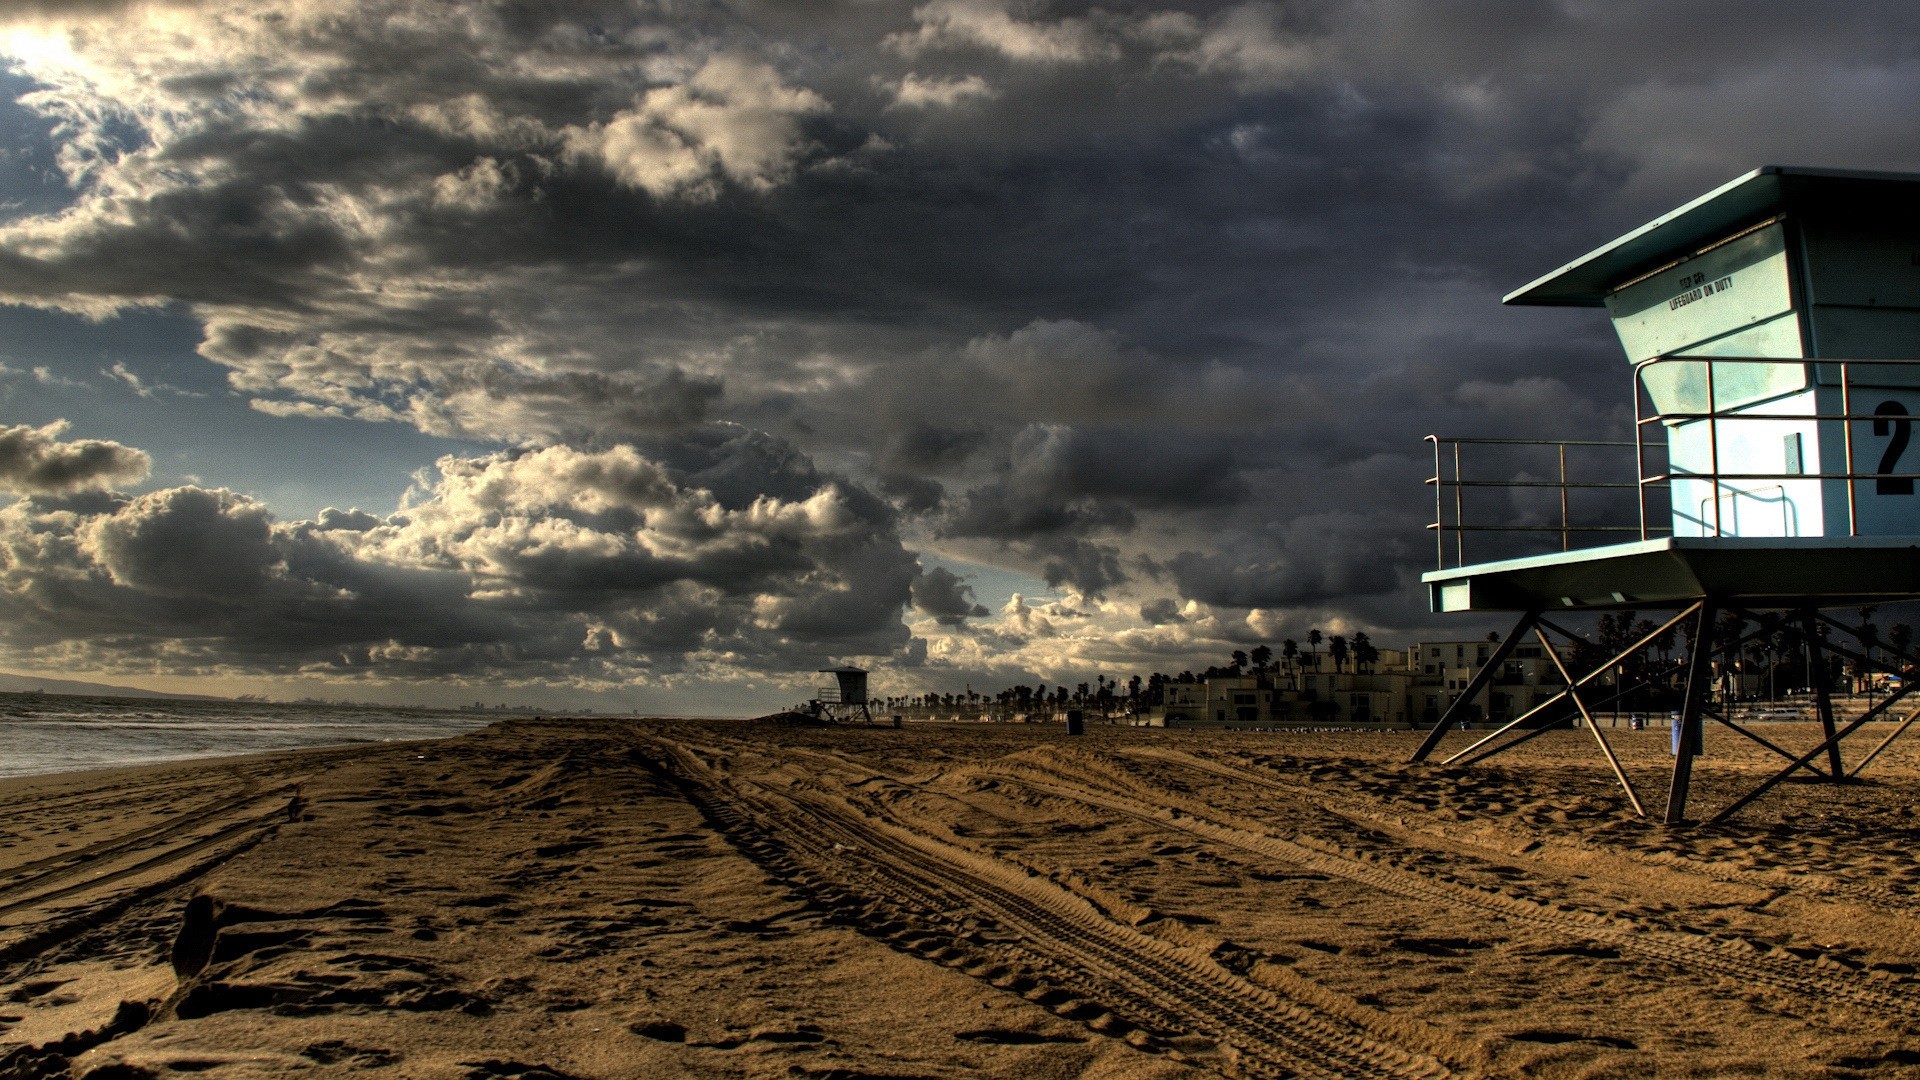 ocean, Clouds, Landscapes, Nature, Beach, Storm, California, Town, Hdr, Photography, Skyscapes Wallpaper